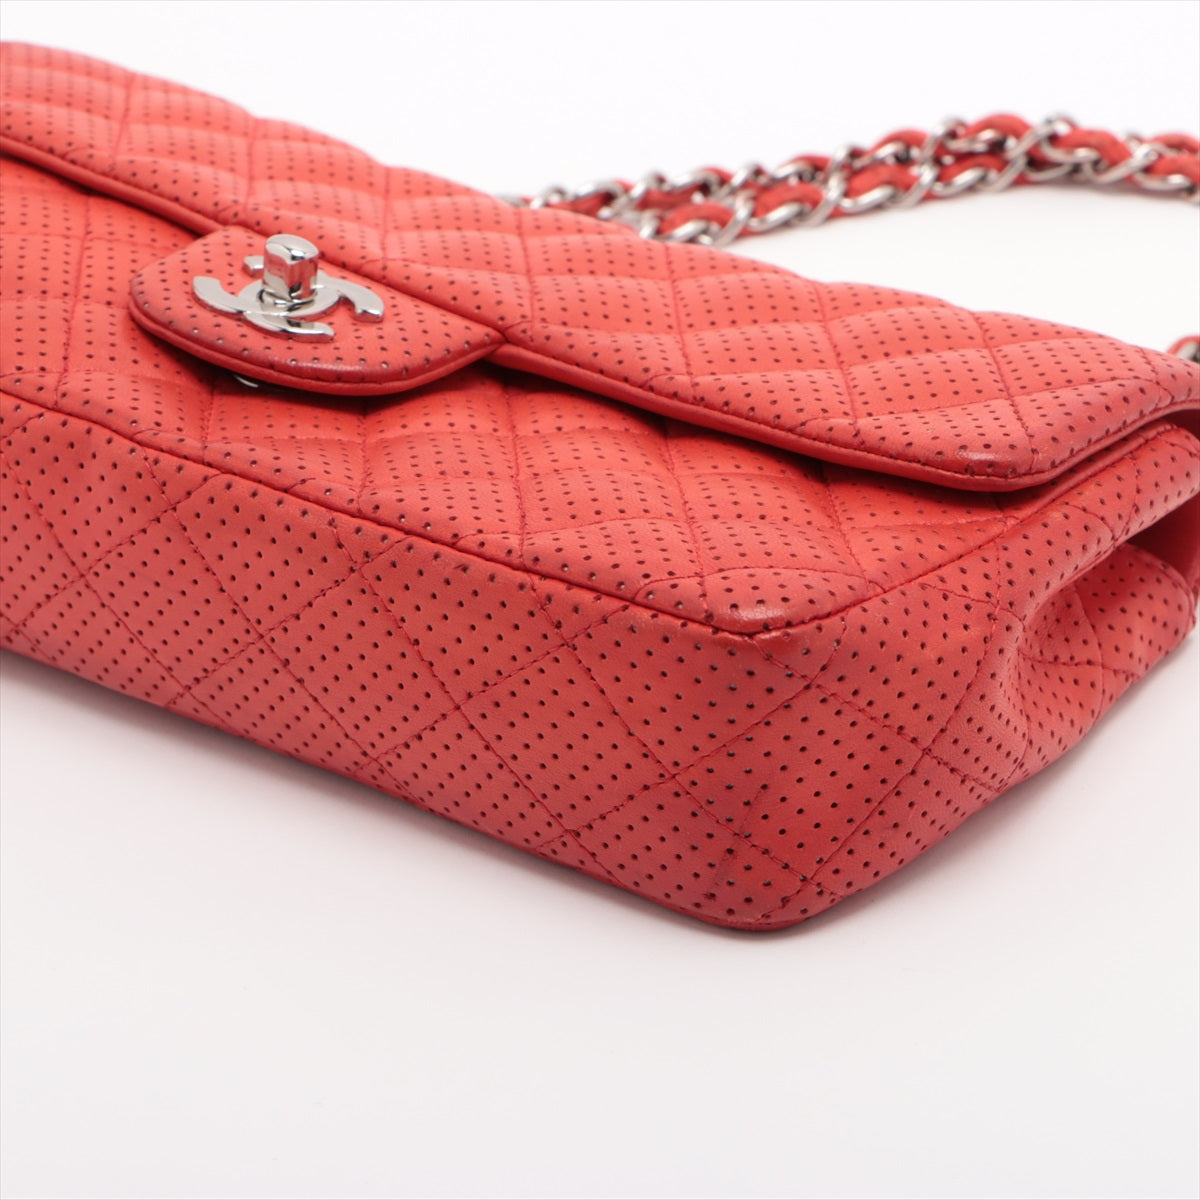 Chanel Matrasse Single Flap Single Chain Bag Red Silver  11th